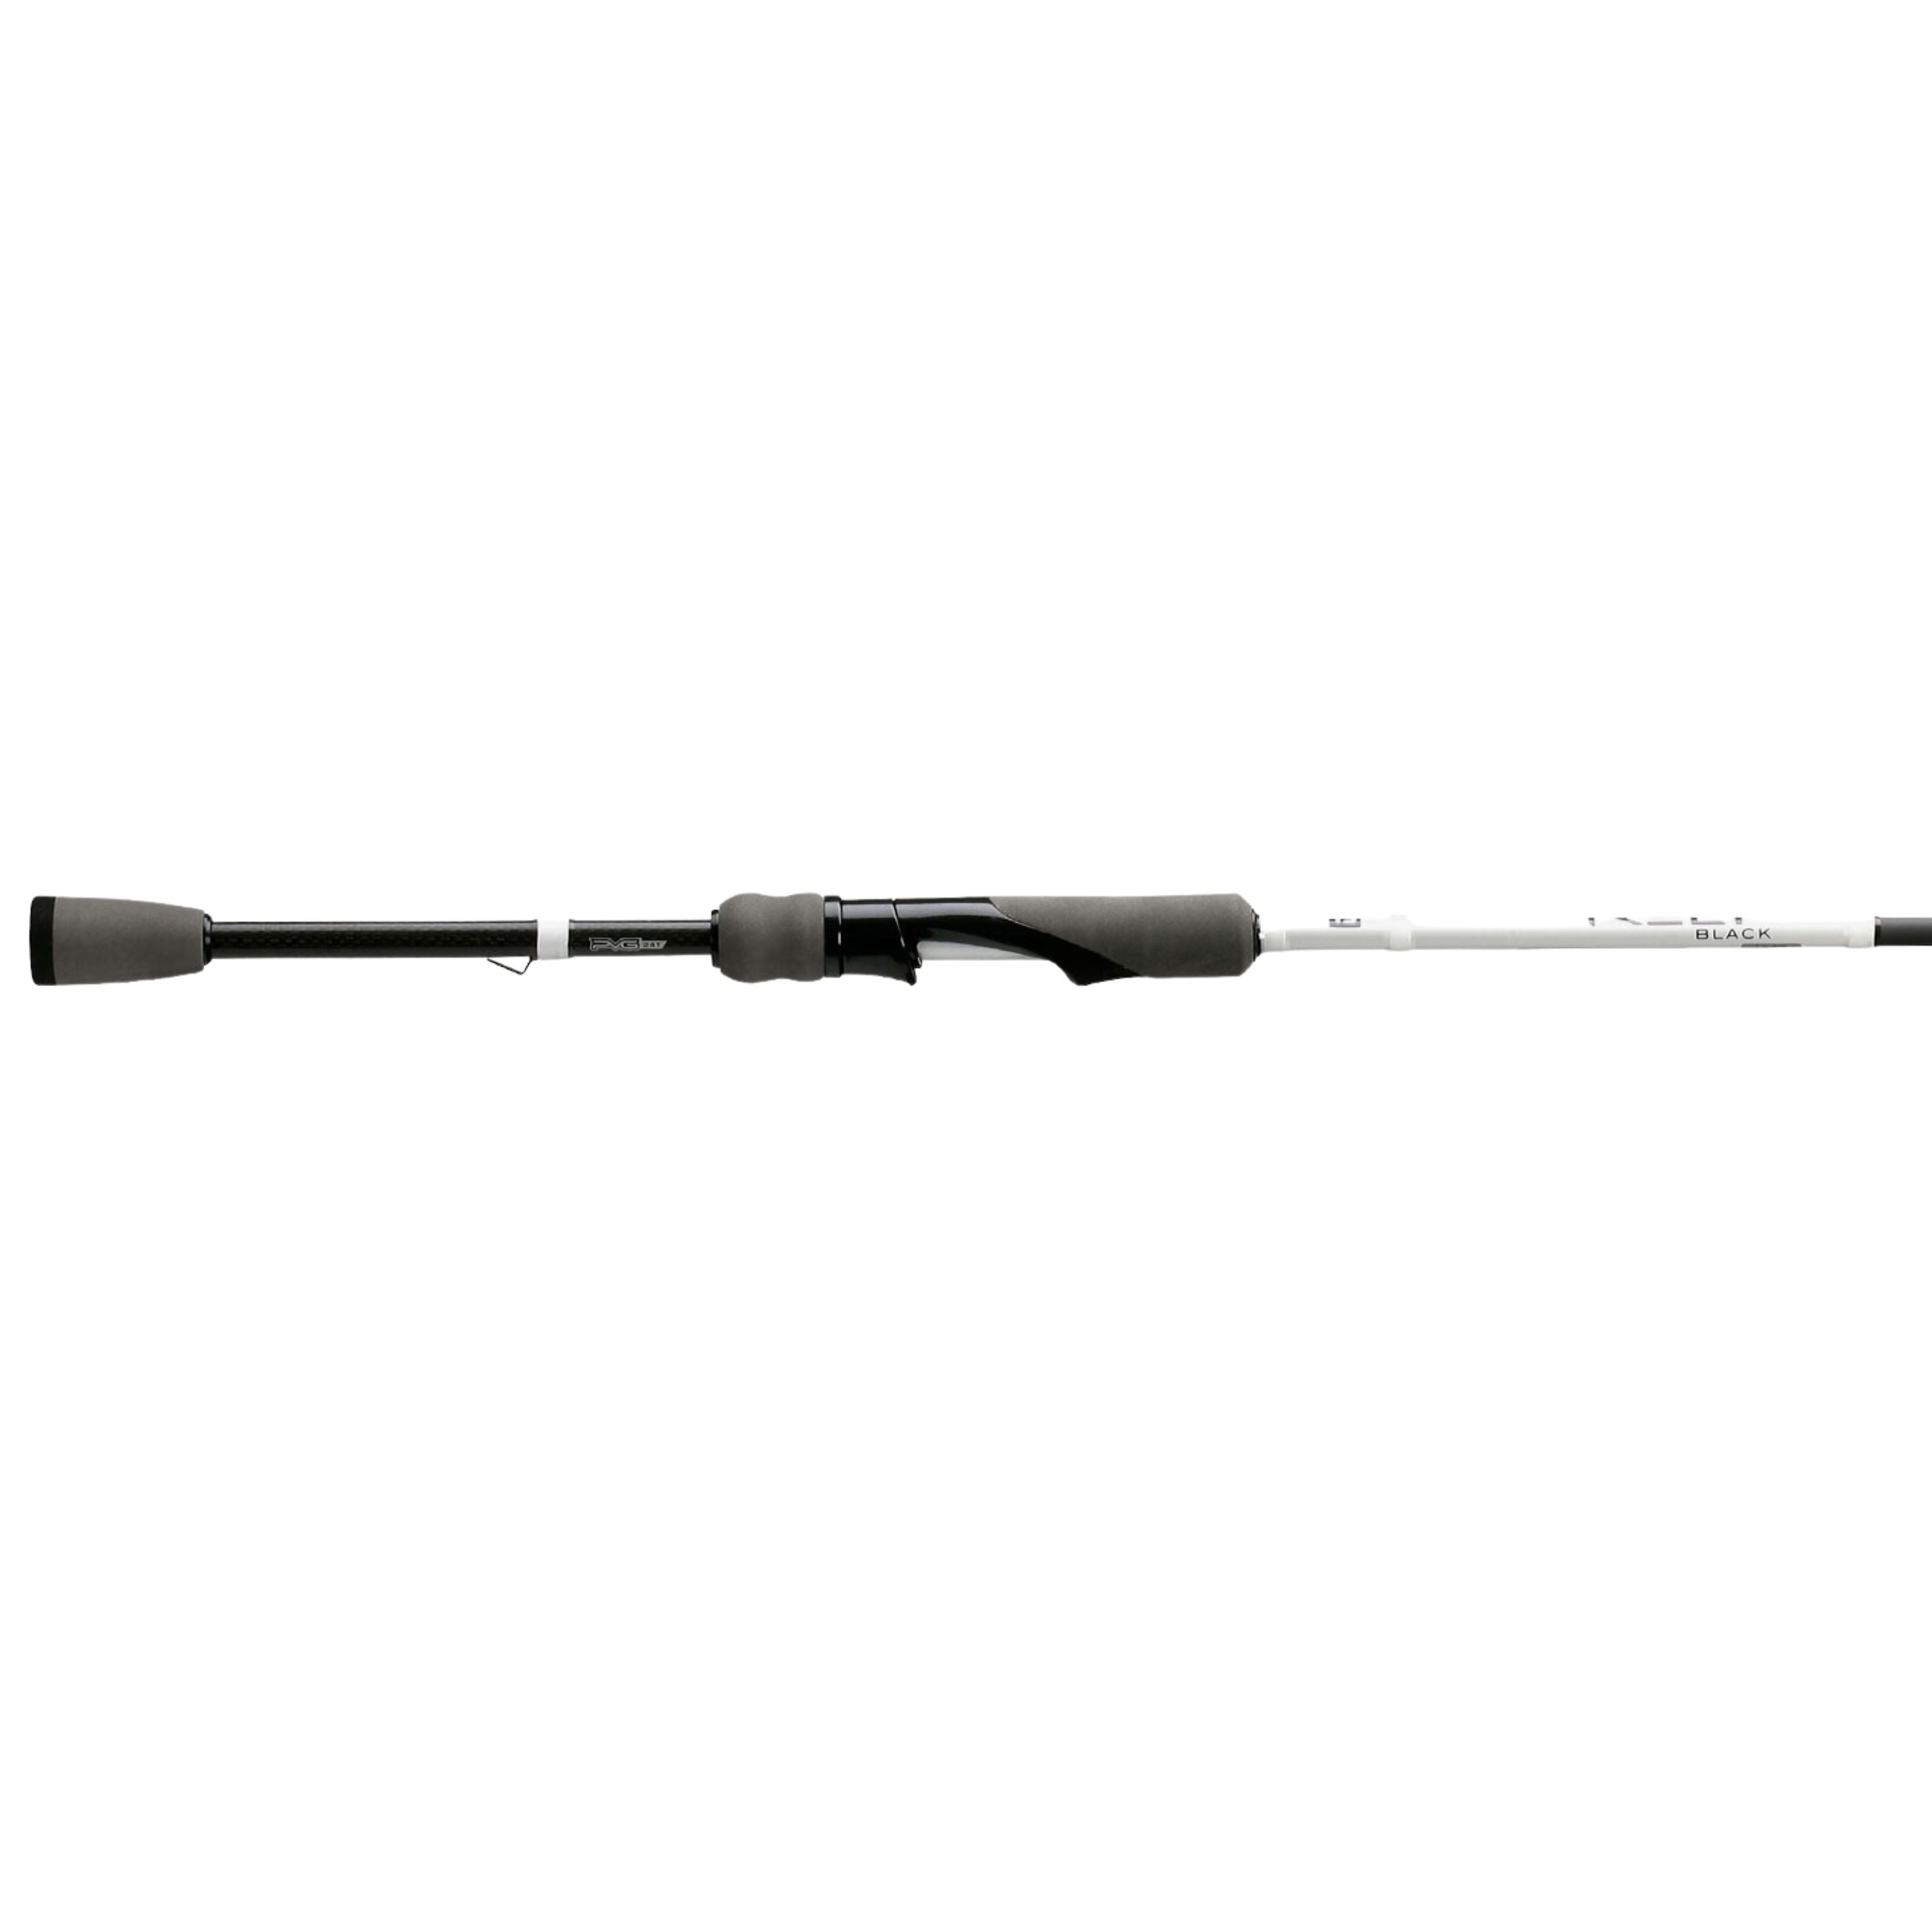 "Rely Black" Spinning rod